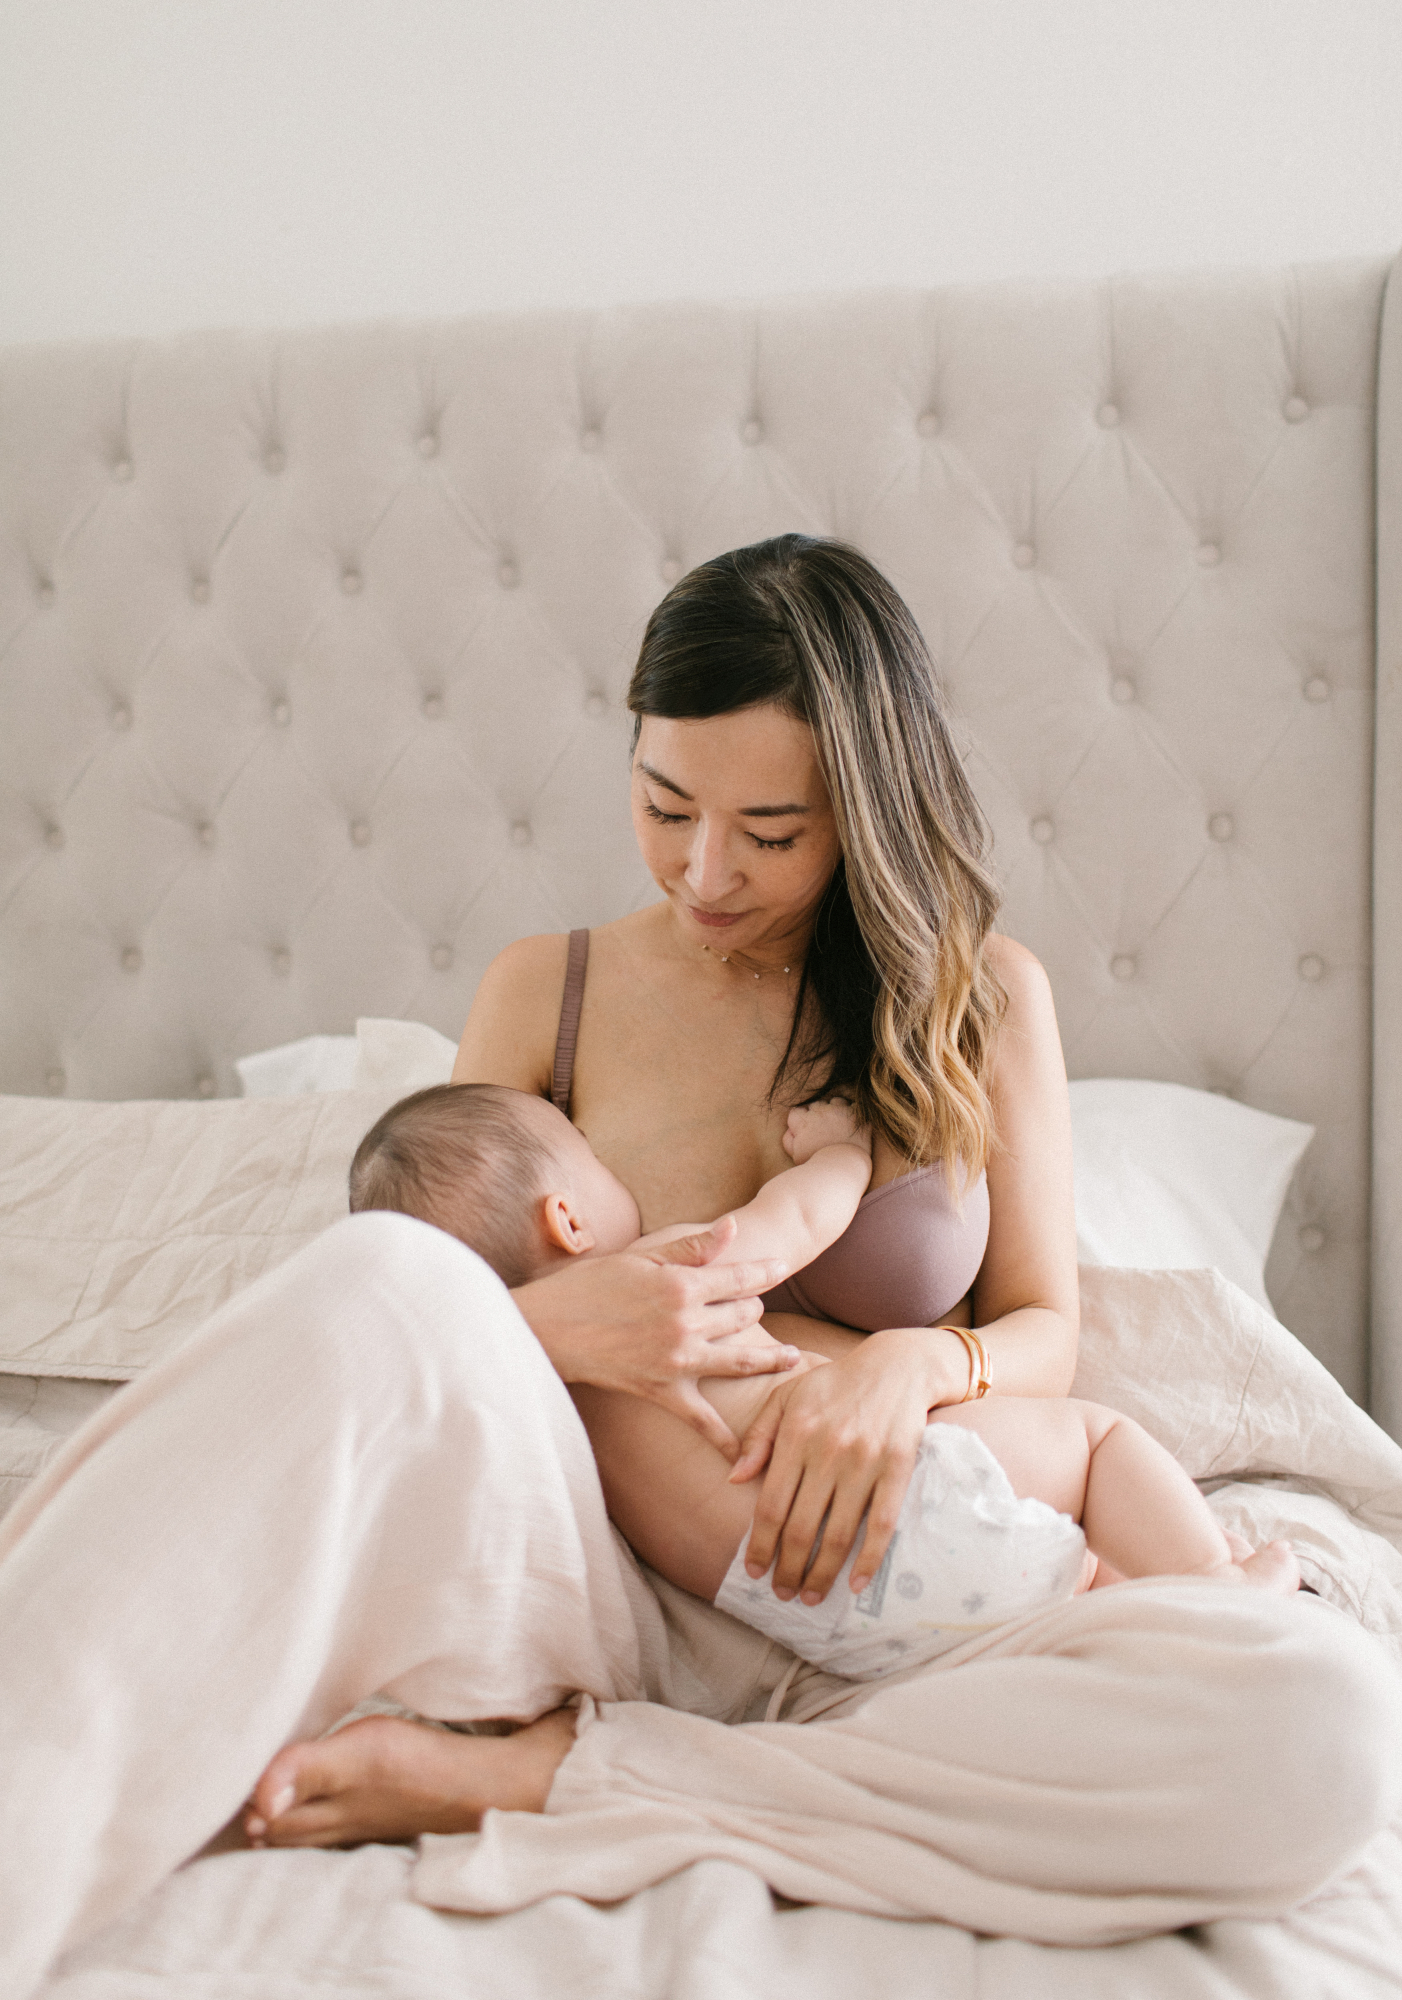 Why I Stopped Breastfeeding At 9 Months